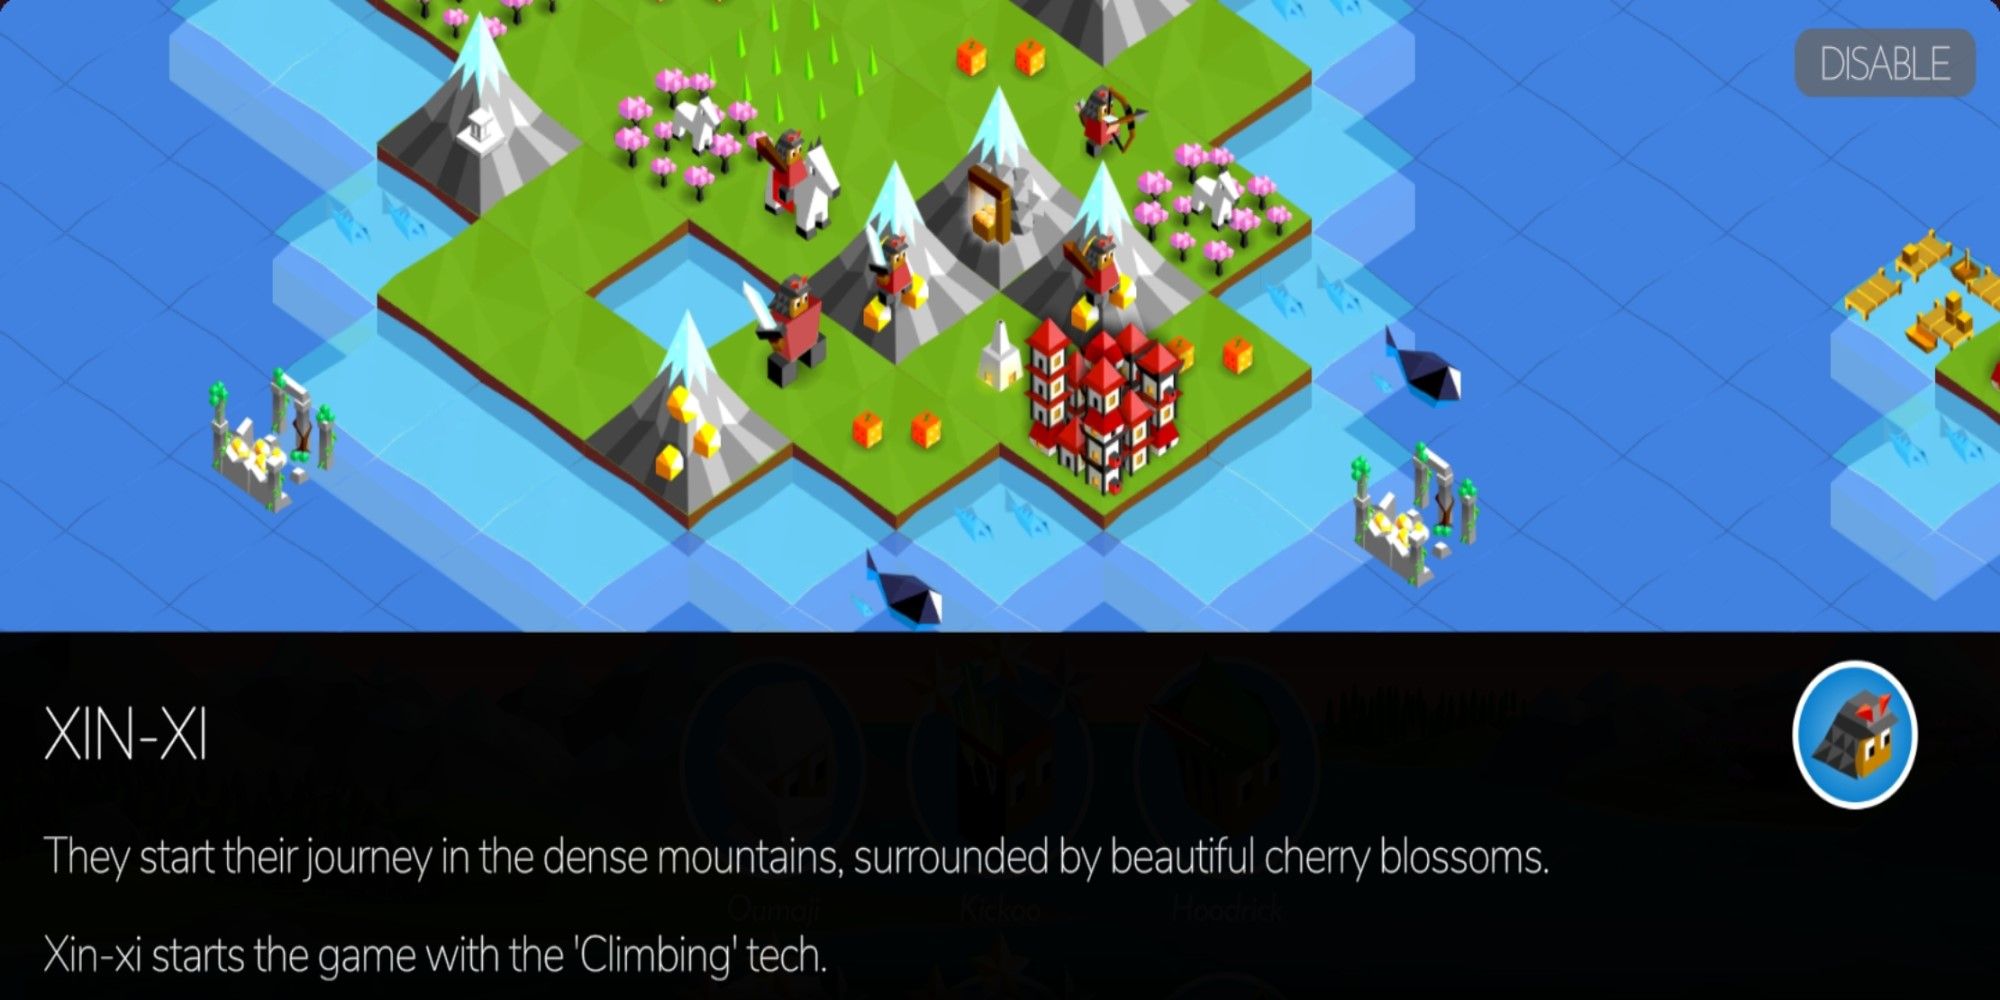 Information on the Xin-Xi Tribe from Battle of Polytopia.